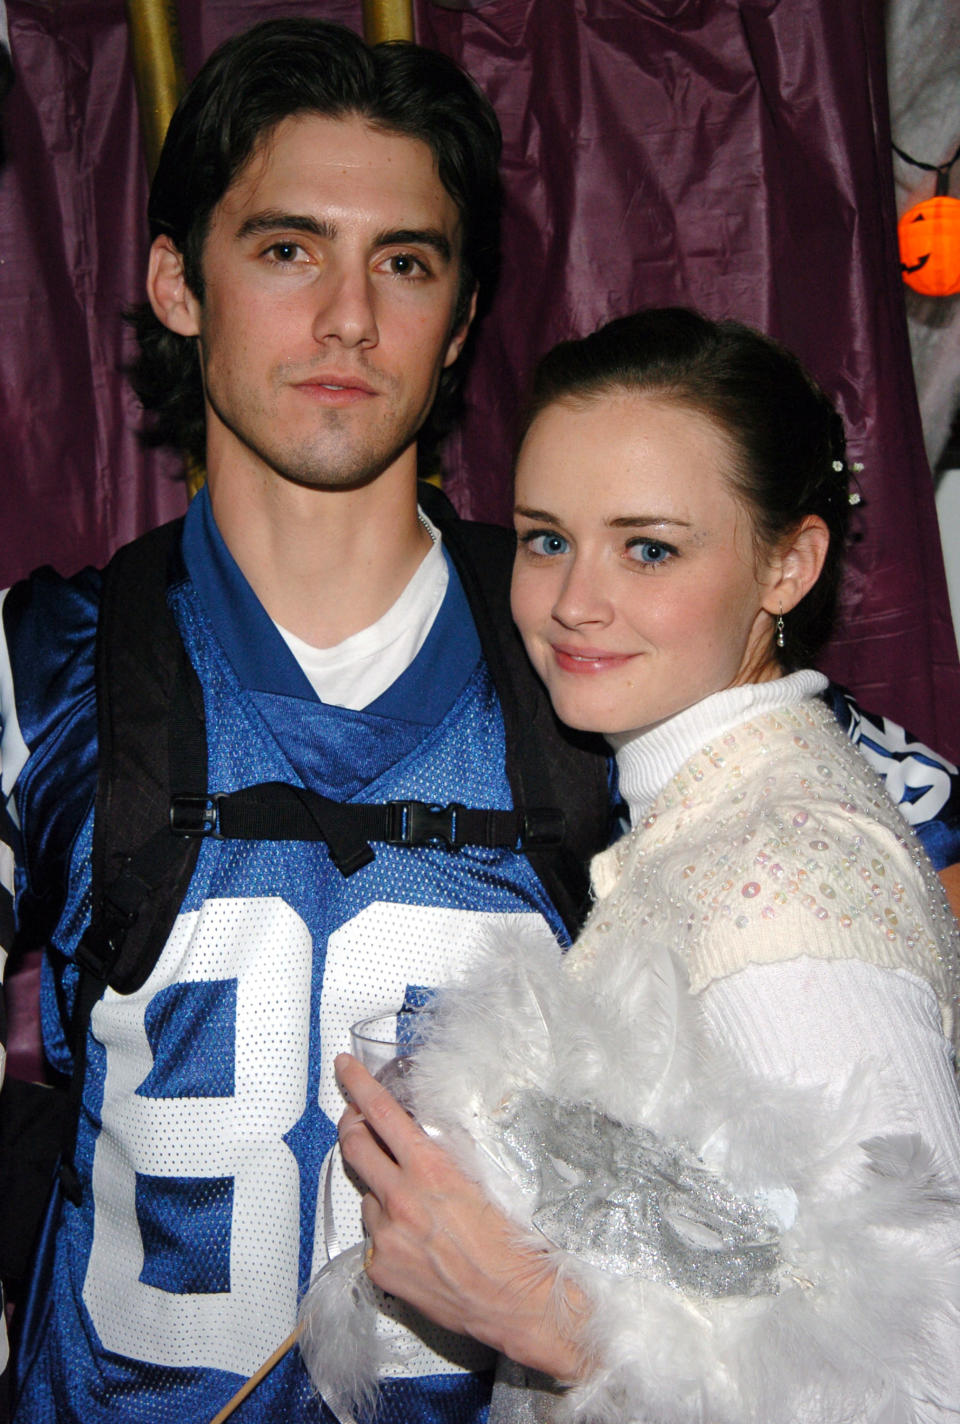 Milo Ventimiglia in a football jersey standing next to Alexis Bledel who's wearing a  sequined sweater